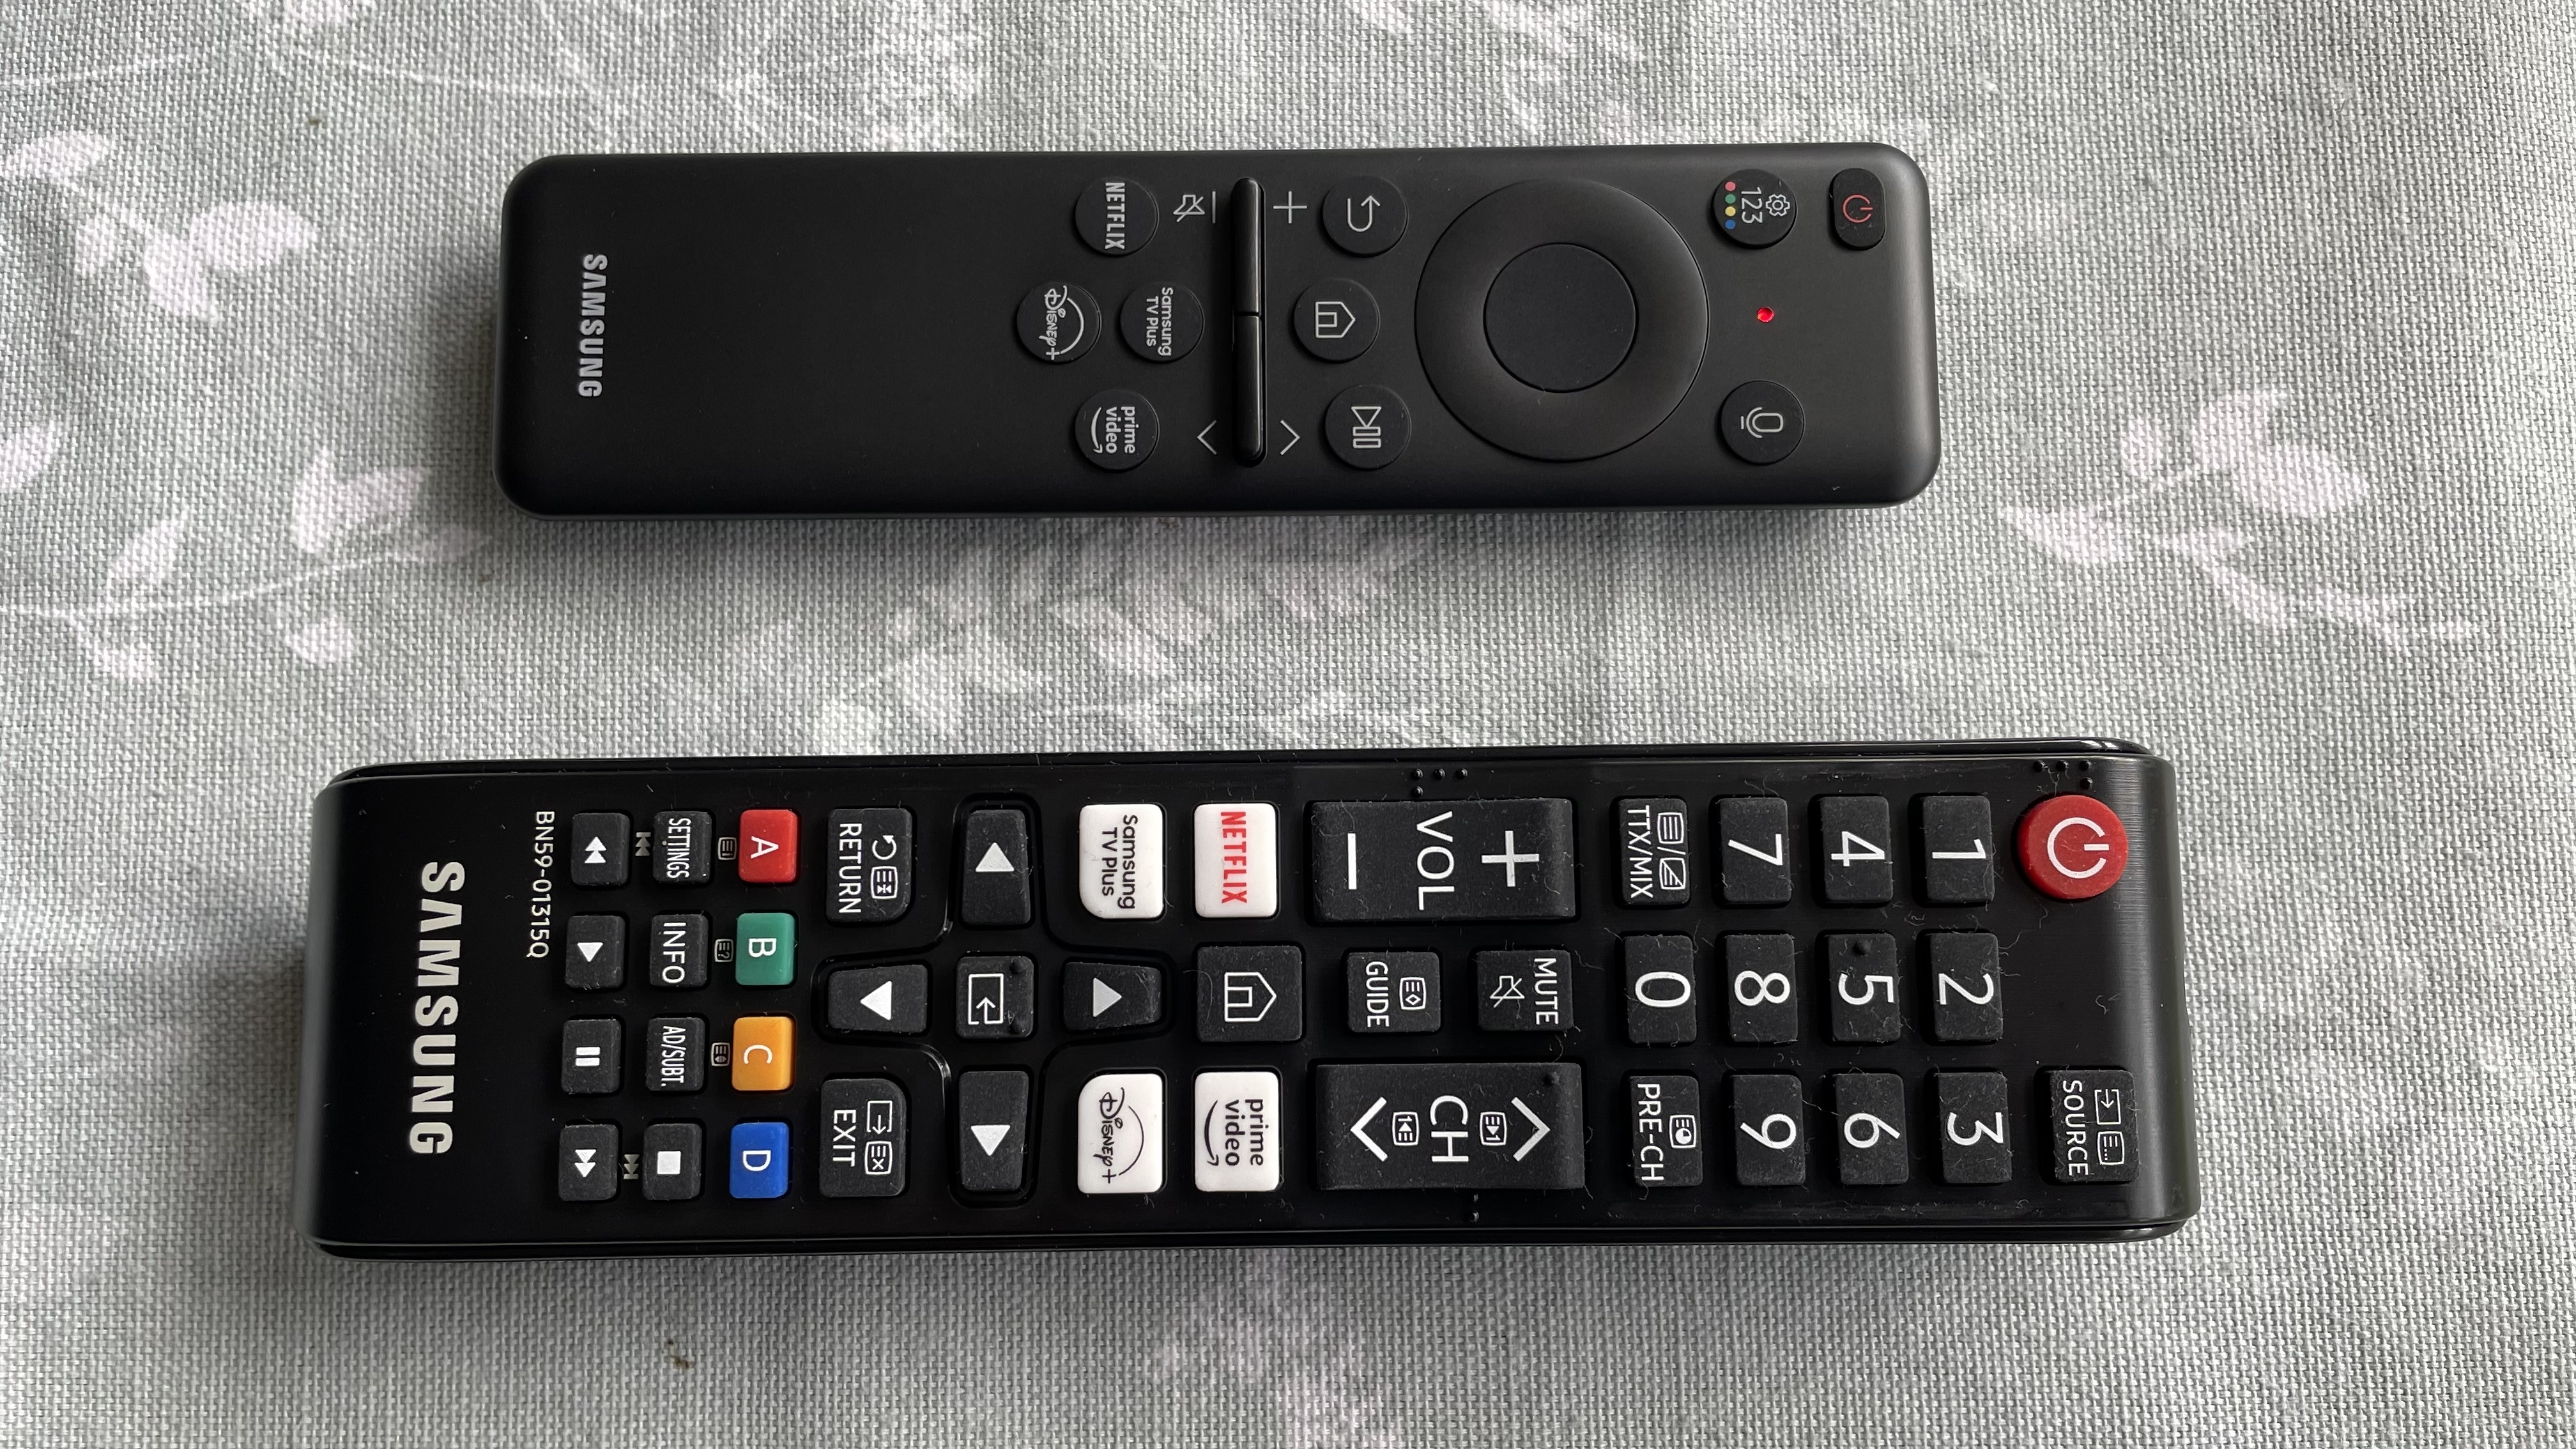 Samsung Q80D remote controls on table